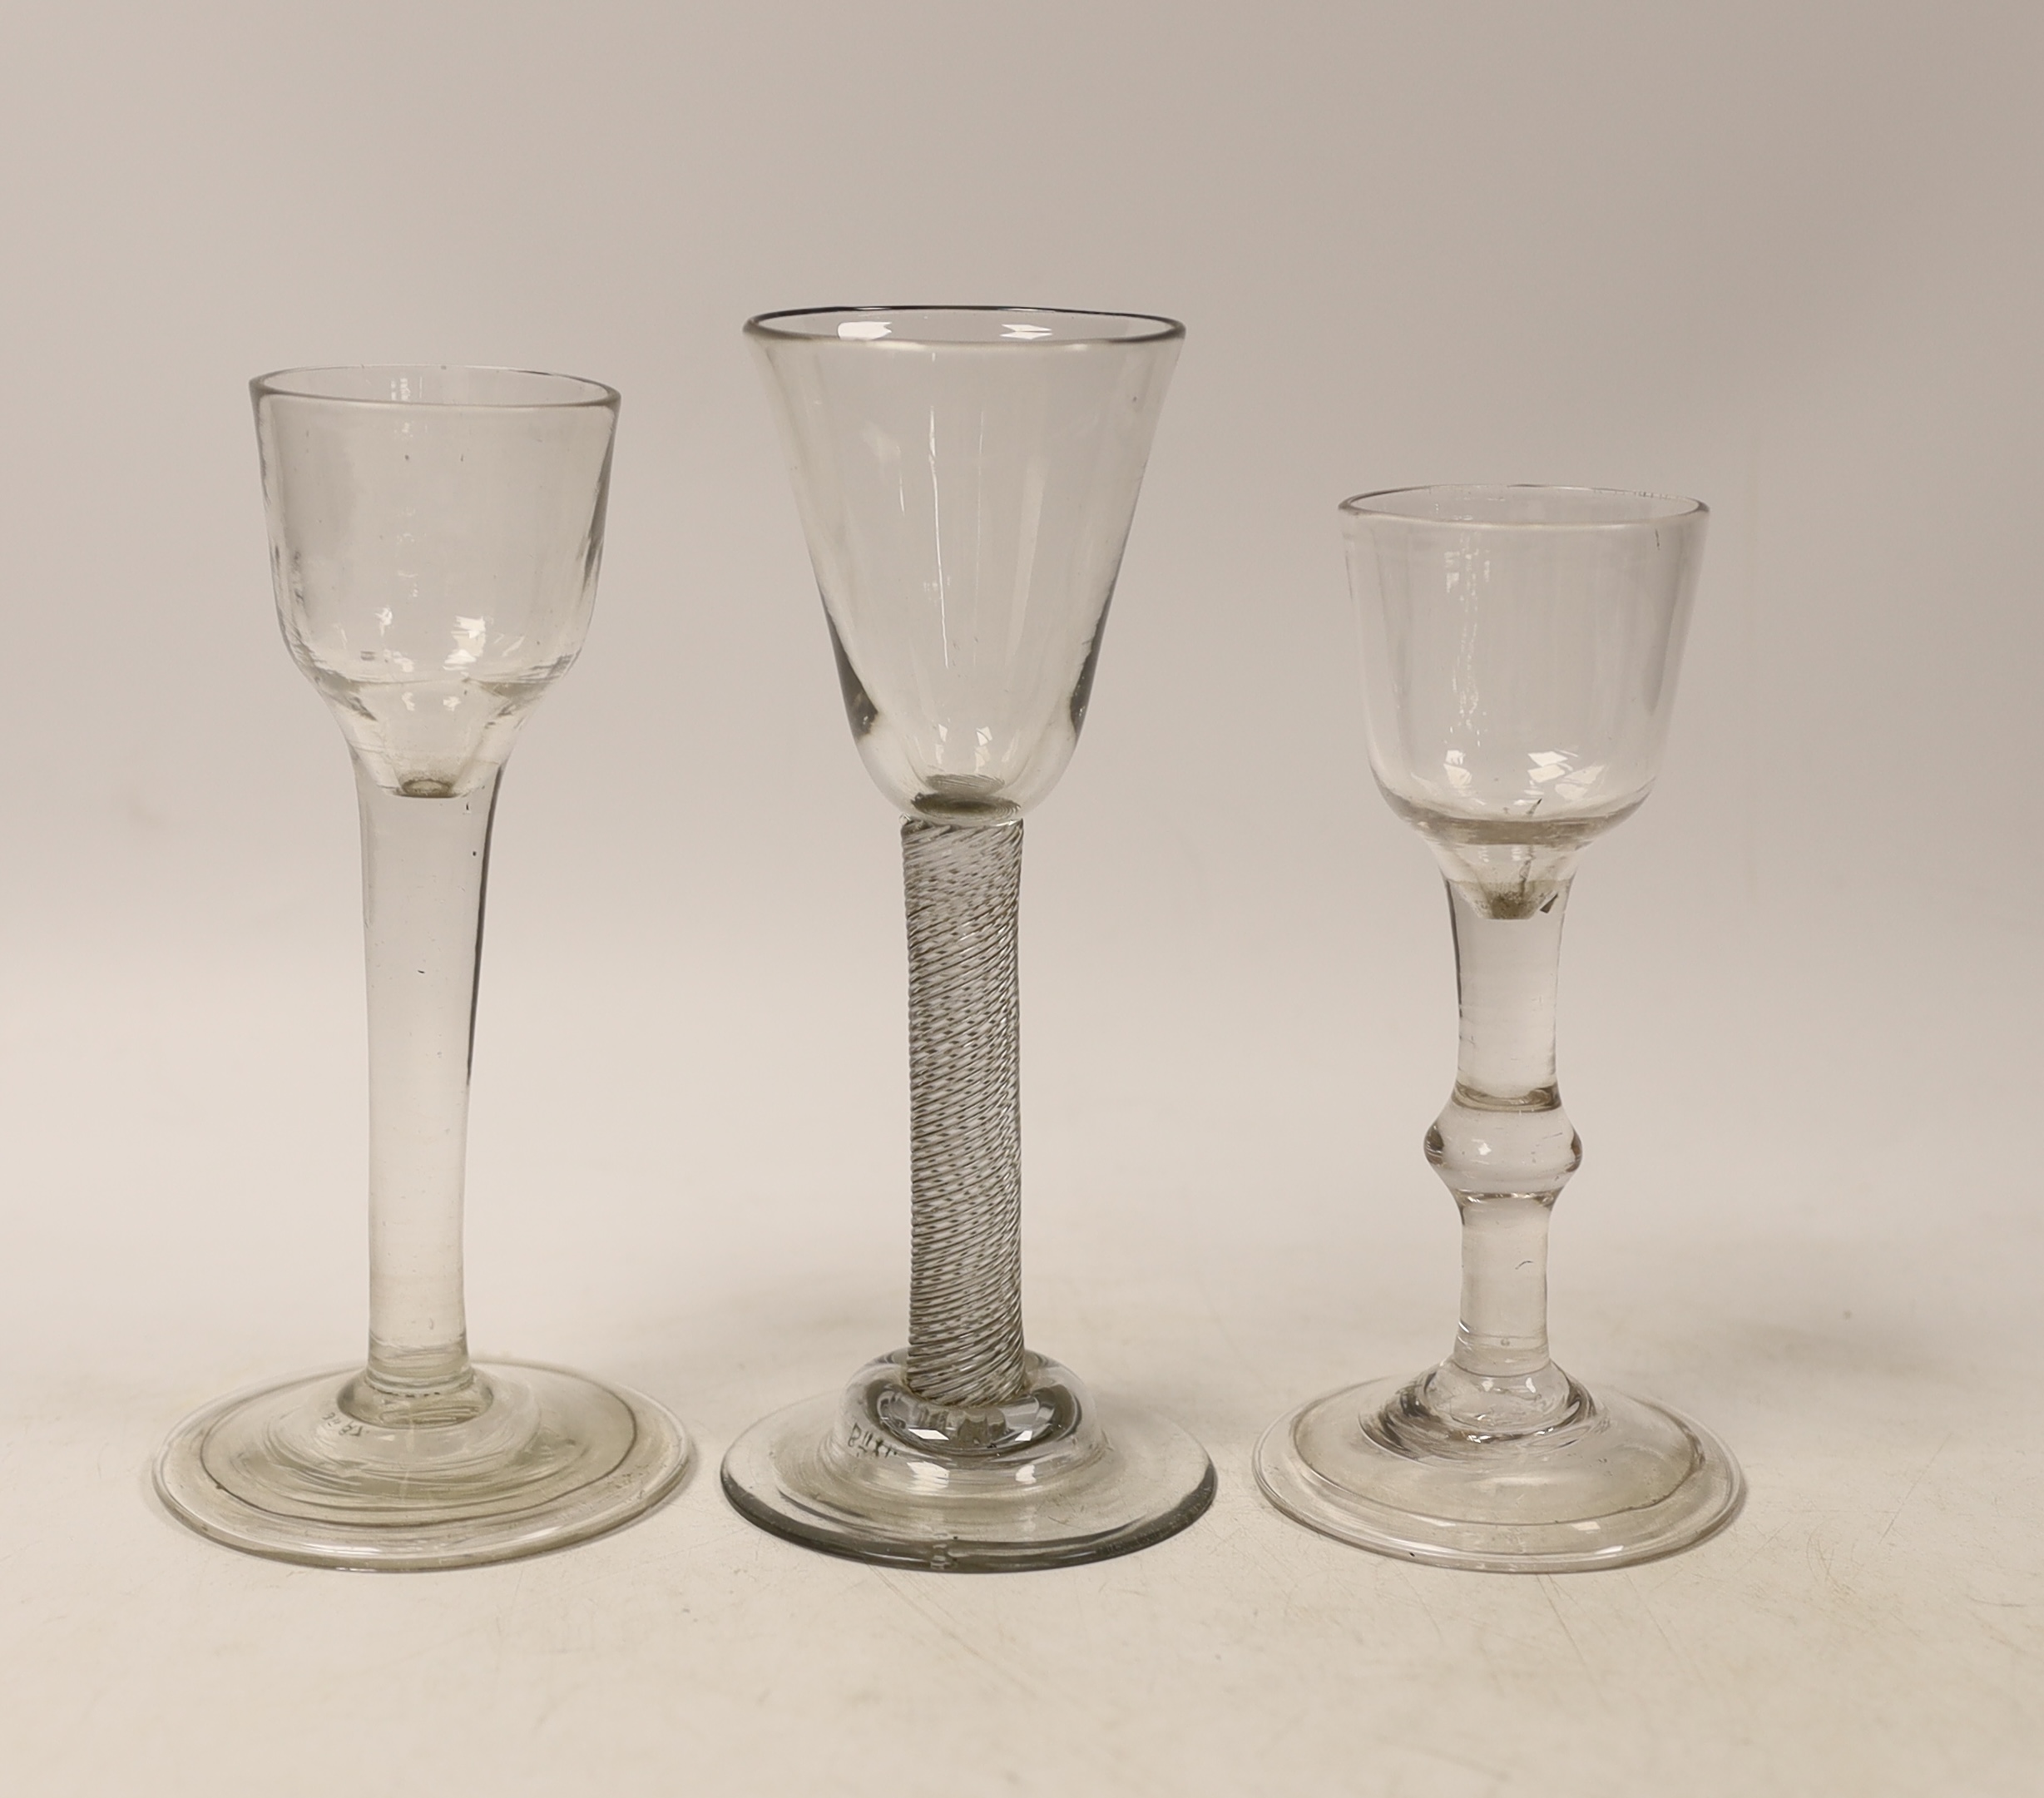 Three cordial glasses, first half 18th century, two with a folded foot, one with single knop and one with an incised twist stem, tallest 16cm